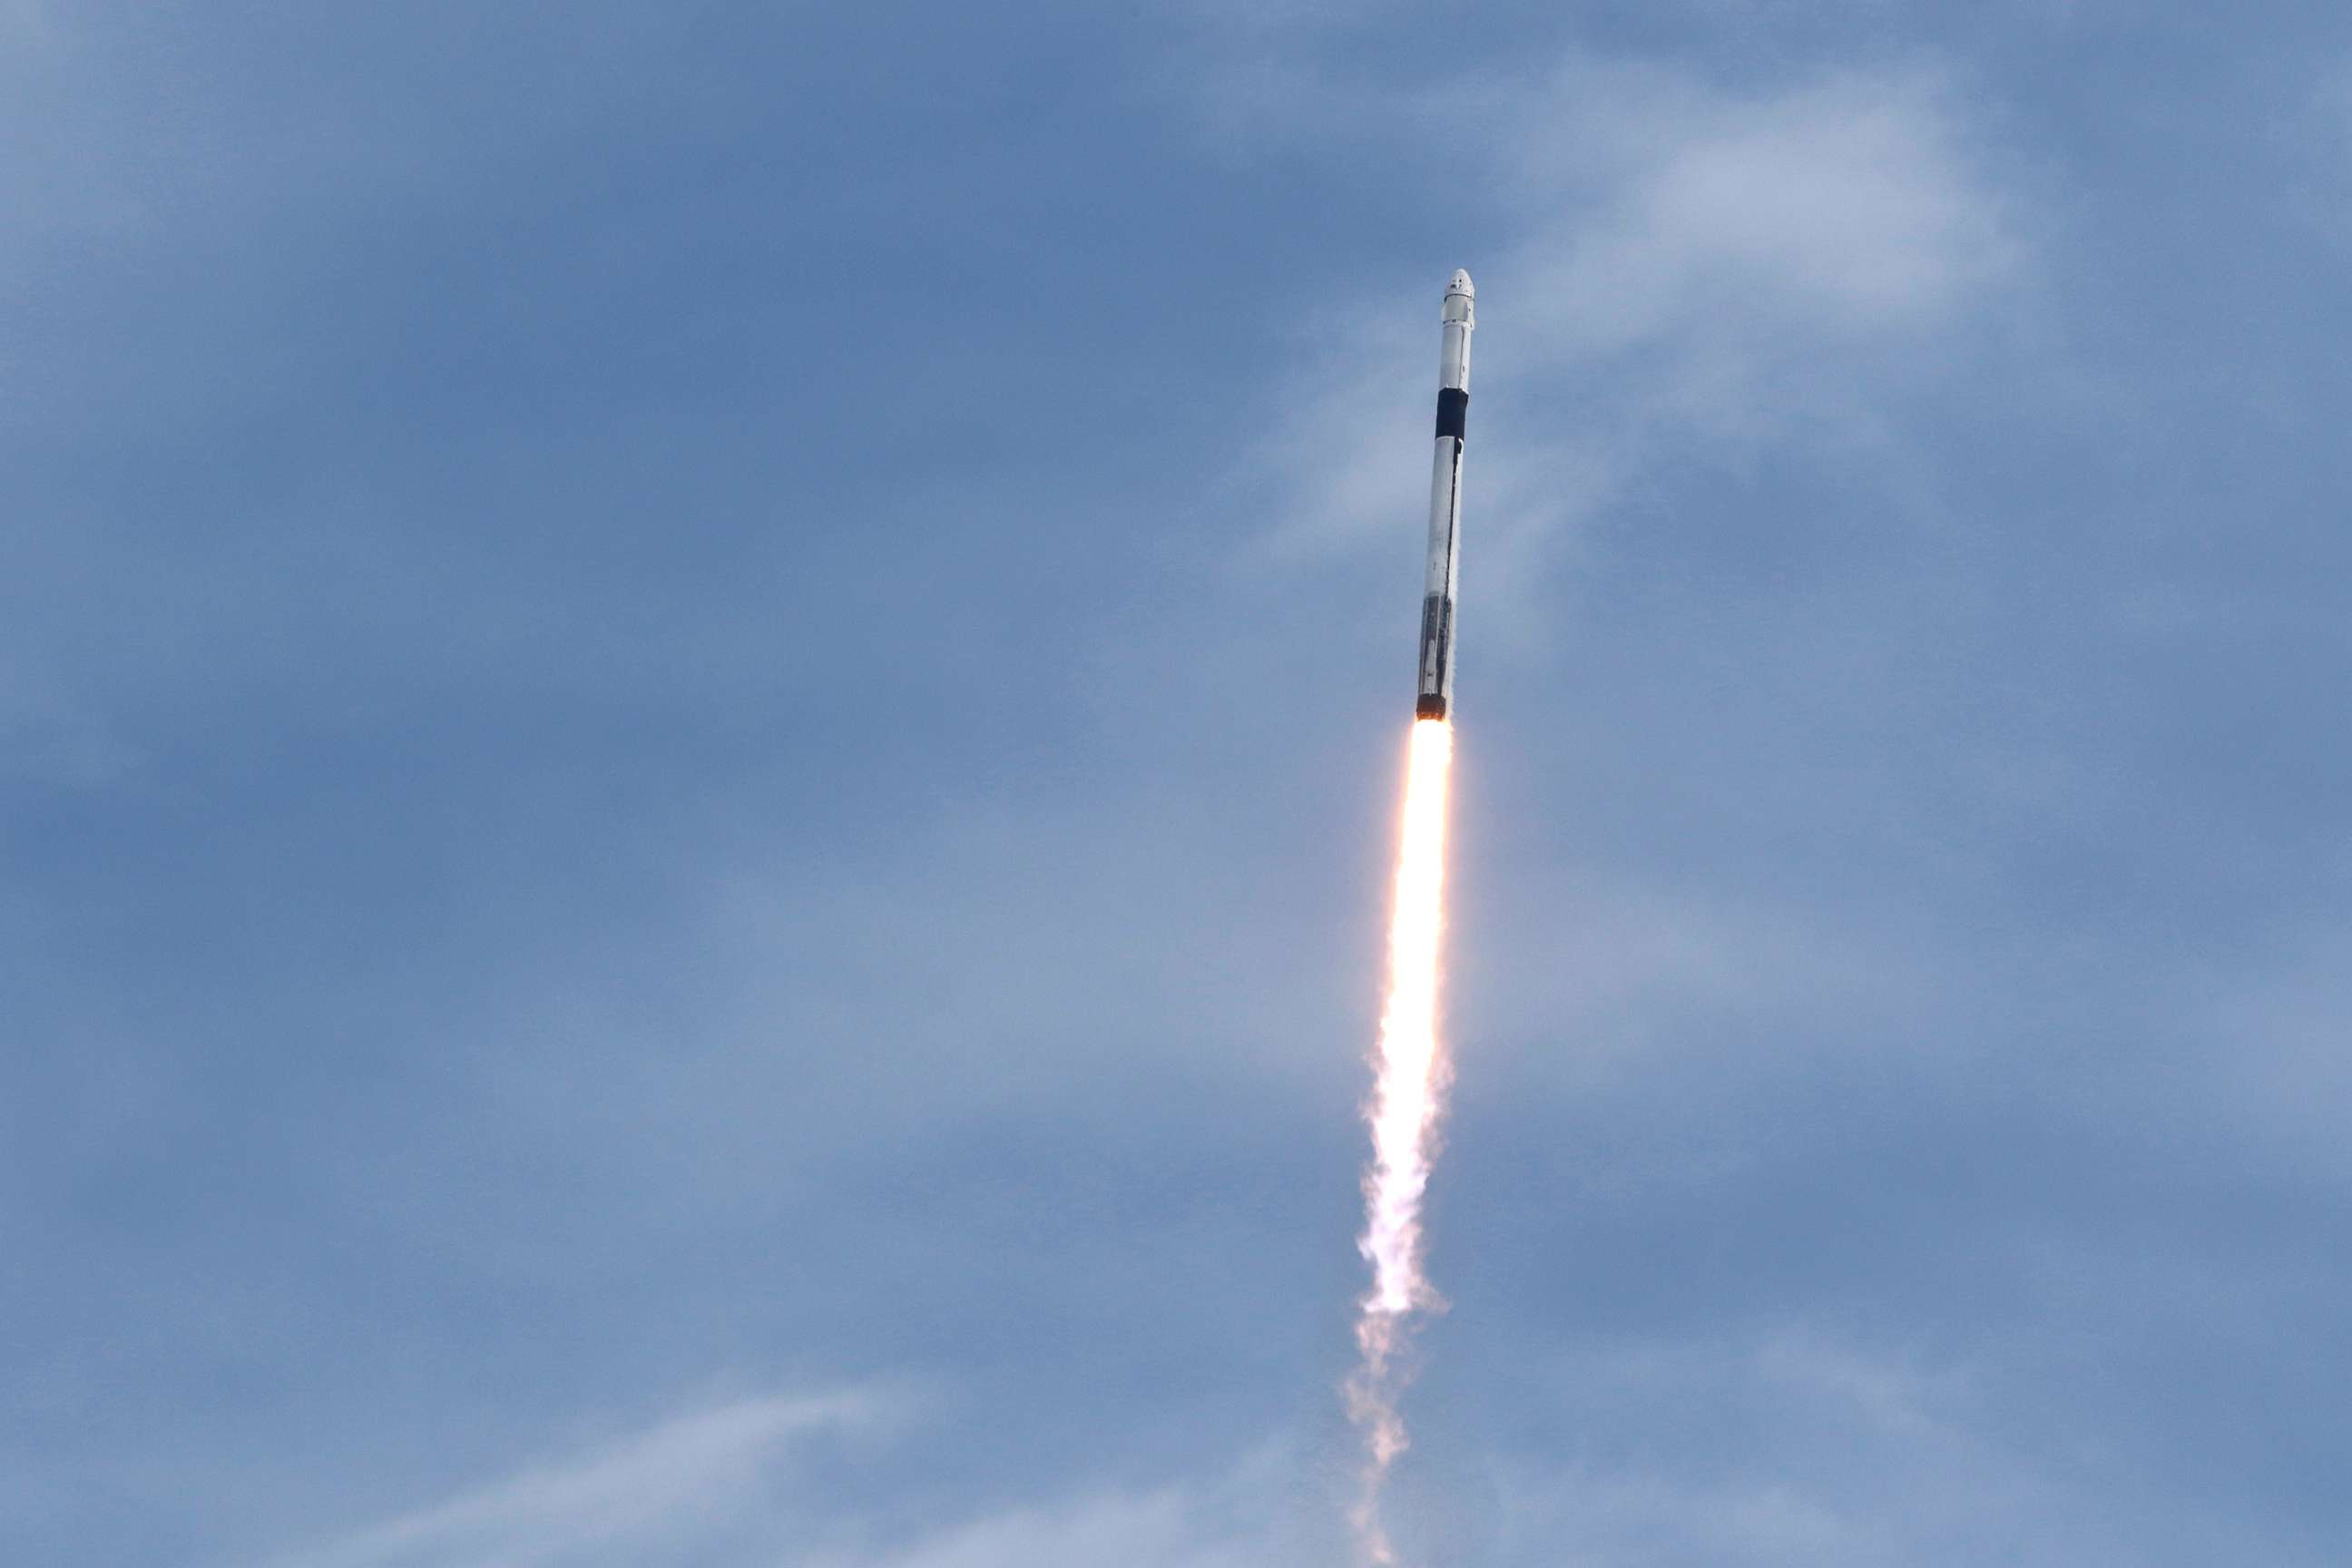 PHOTO: A SpaceX Falcon 9 rocket, carrying the Crew Dragon astronaut capsule, lifts off on an in-flight abort test from the Kennedy Space Center in Cape Canaveral, Fla., Jan. 19, 2020. 